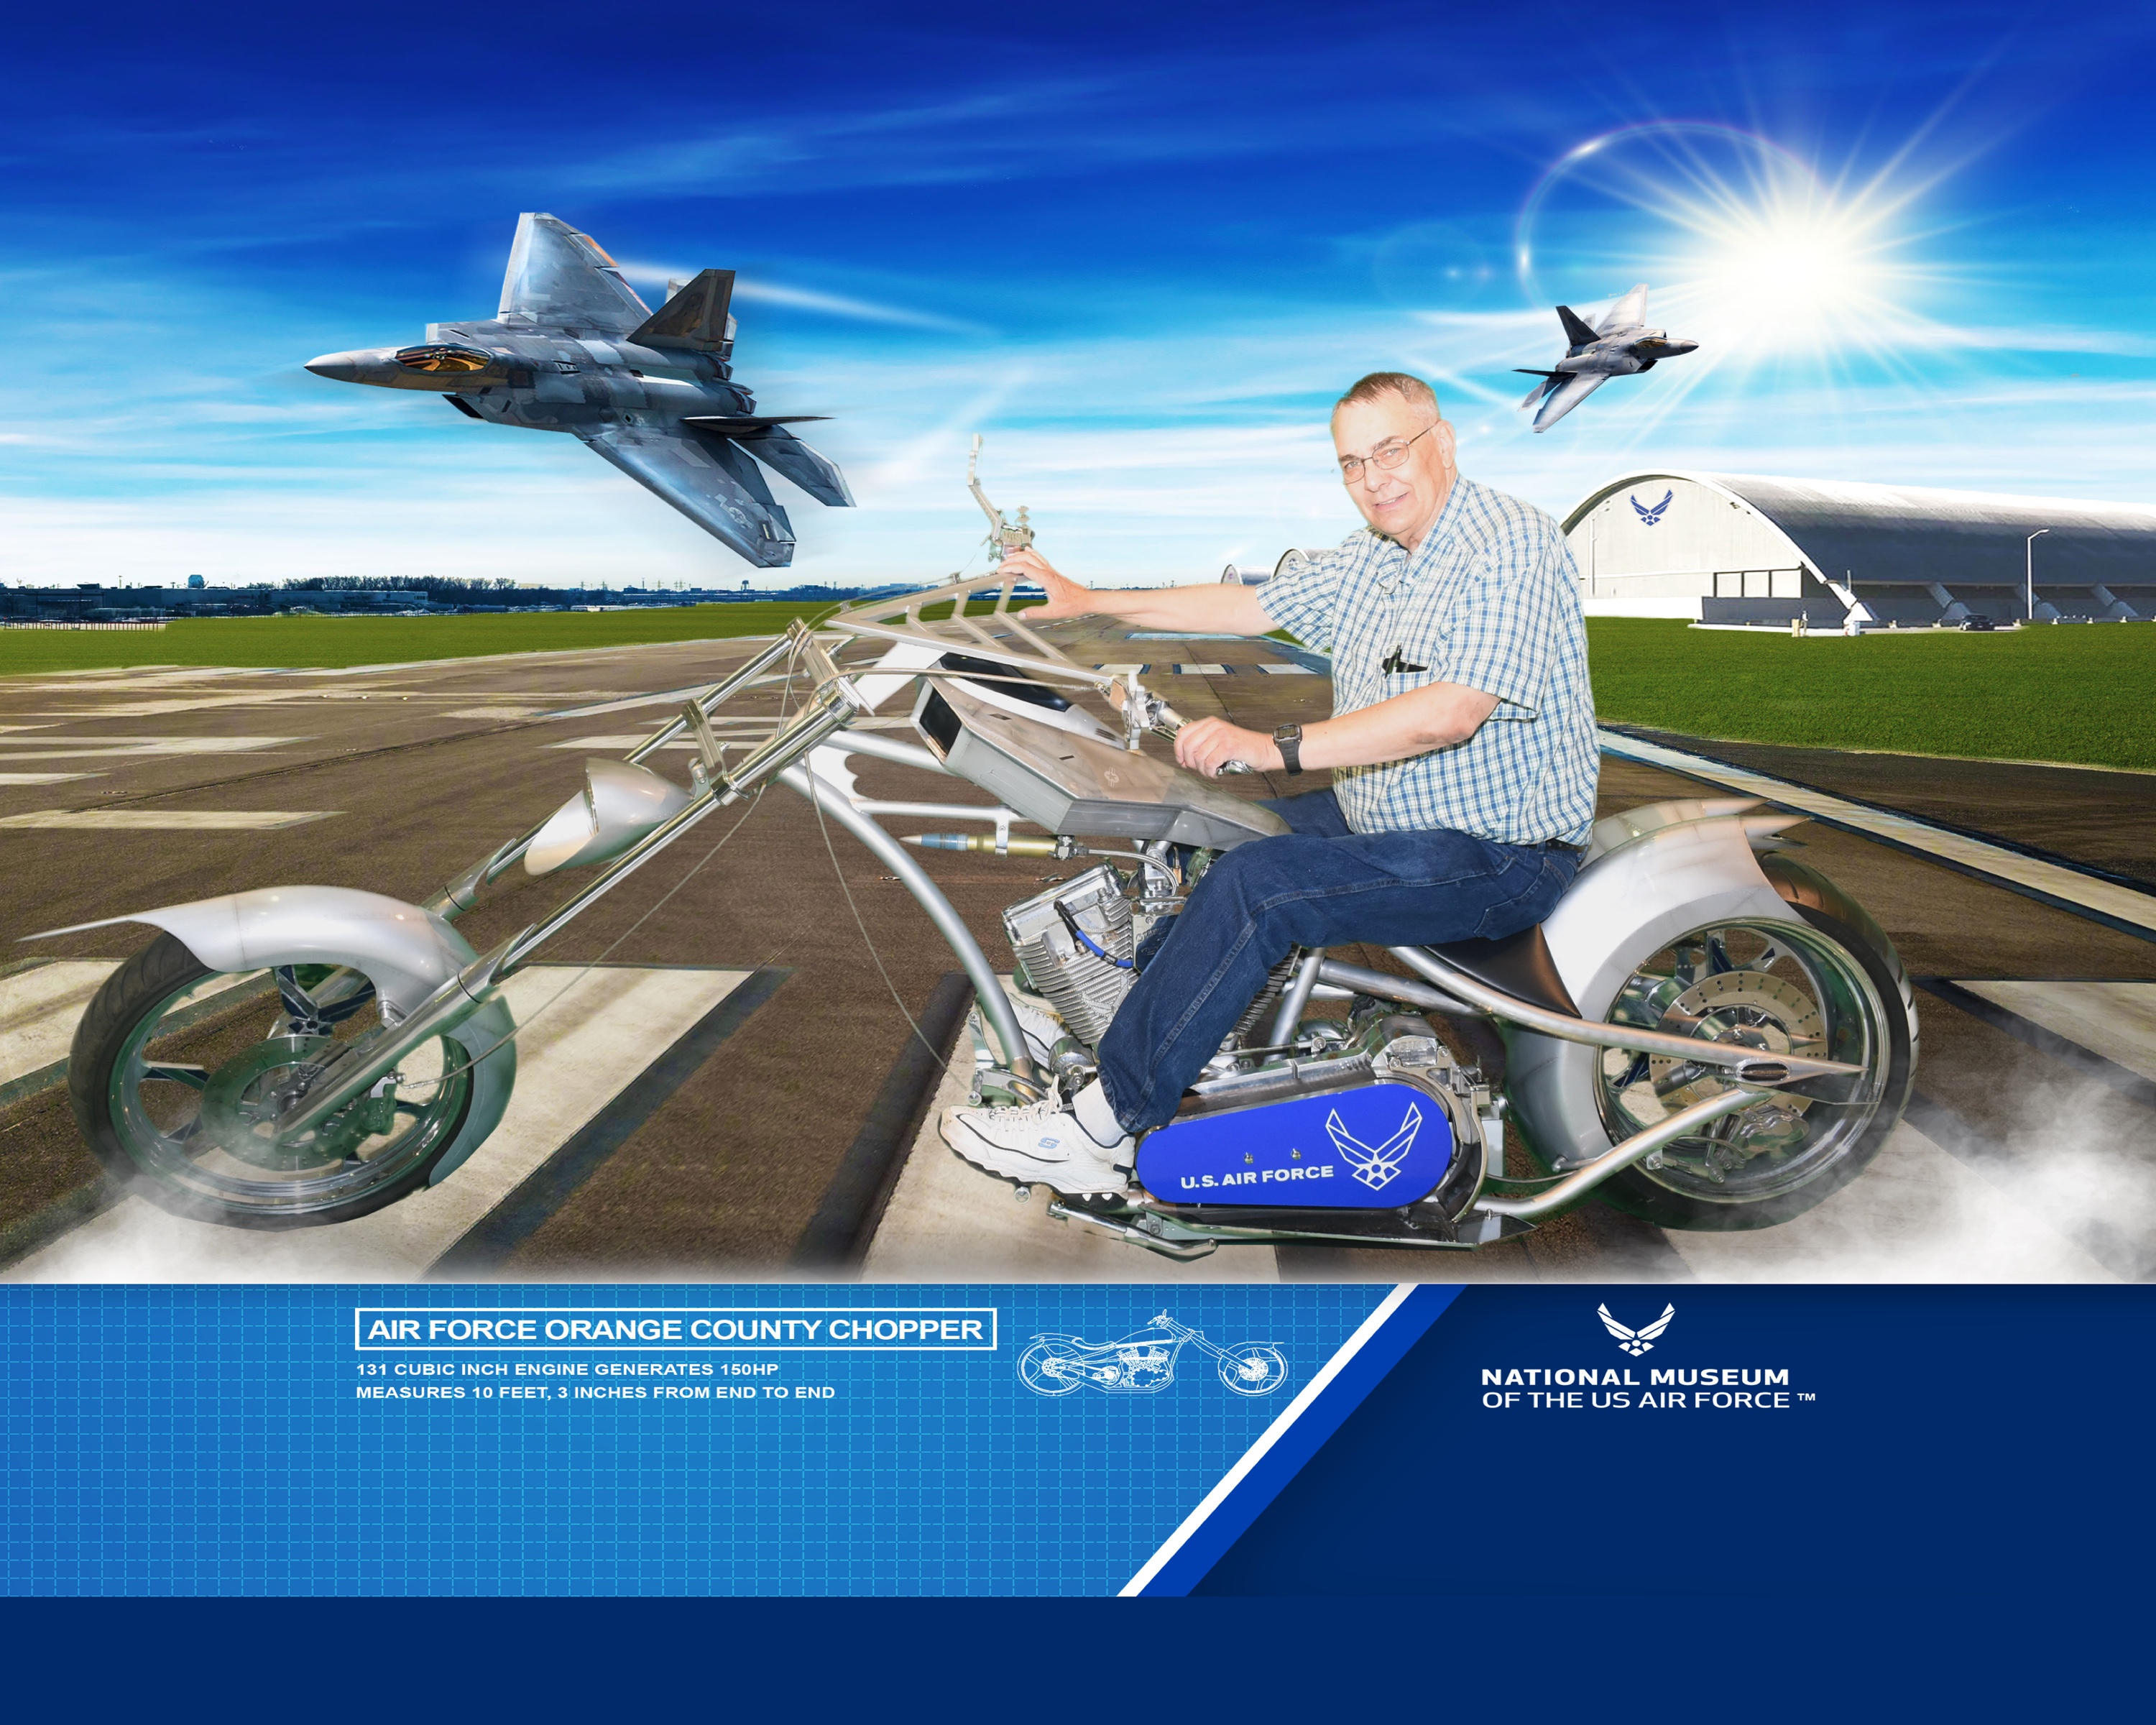 Sample of green screen picture. Man sitting on motorcycle in front of a digital image of the museum.